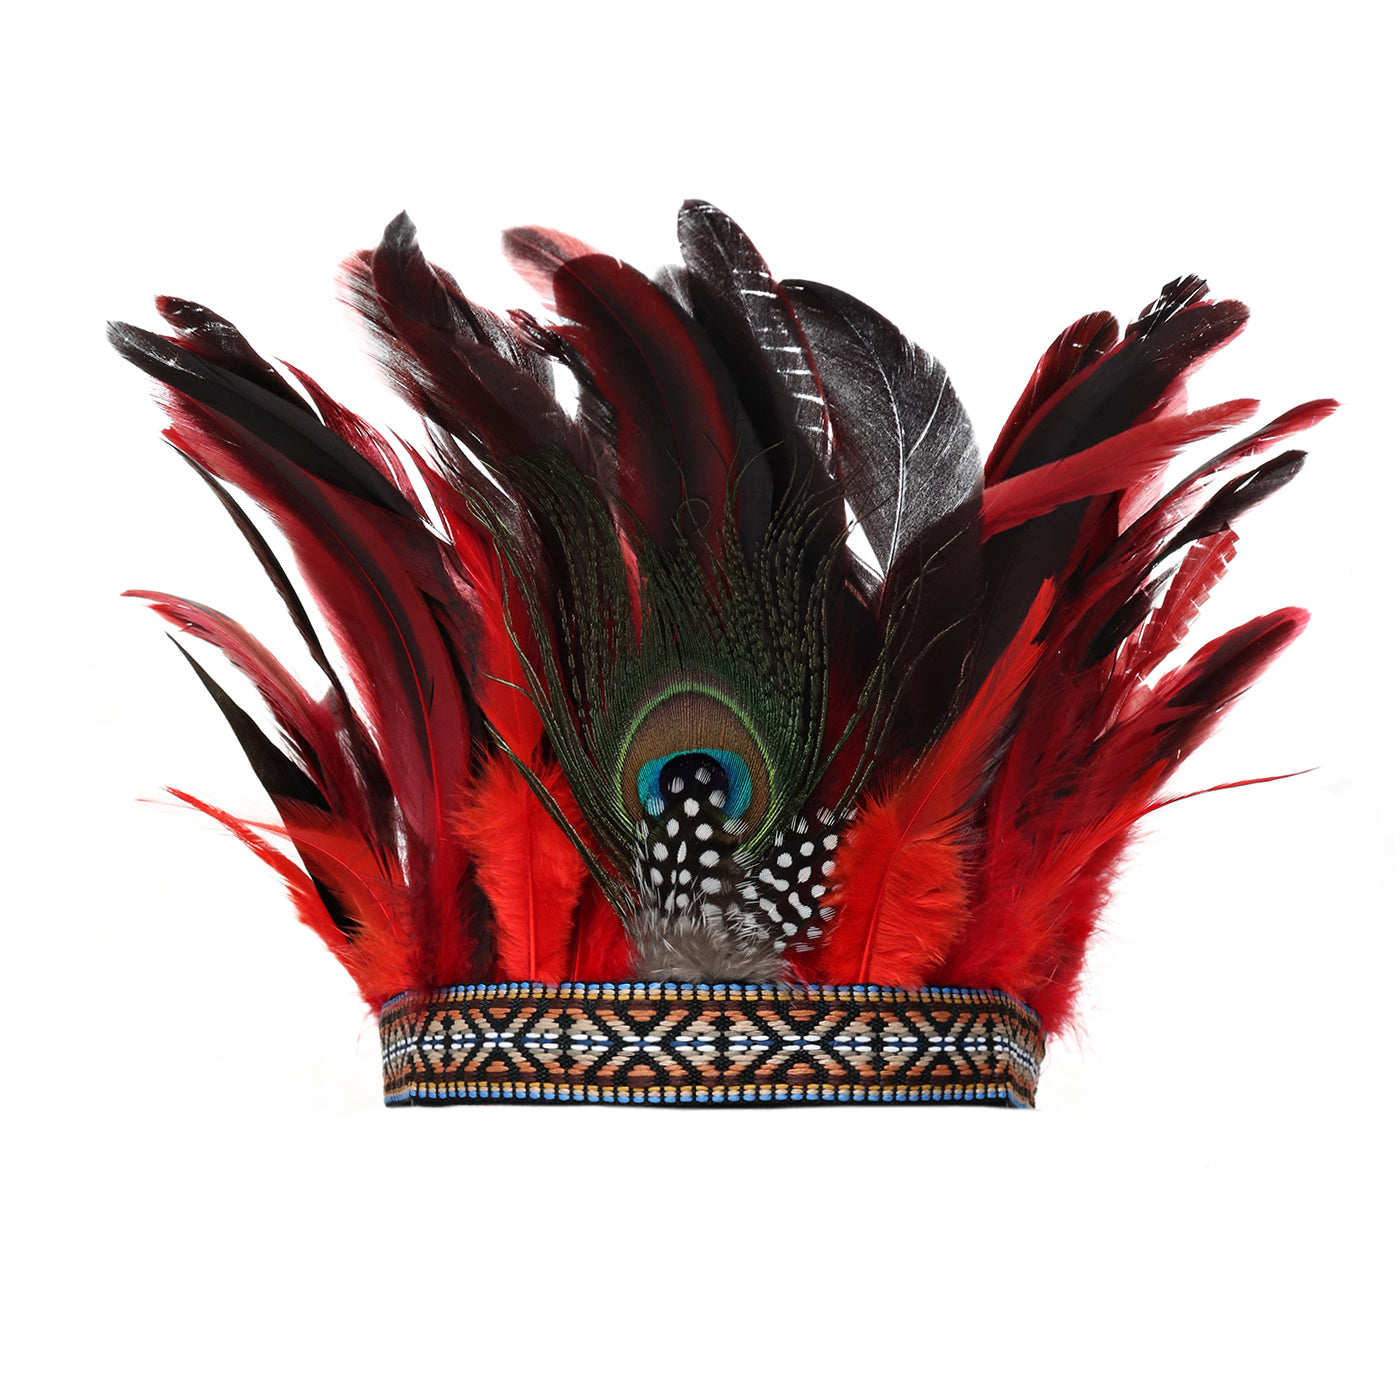 DAZCOS Peacock Feather Crown Carnival Headpiece Showgirl Headdress 1920s Flapper Accessories